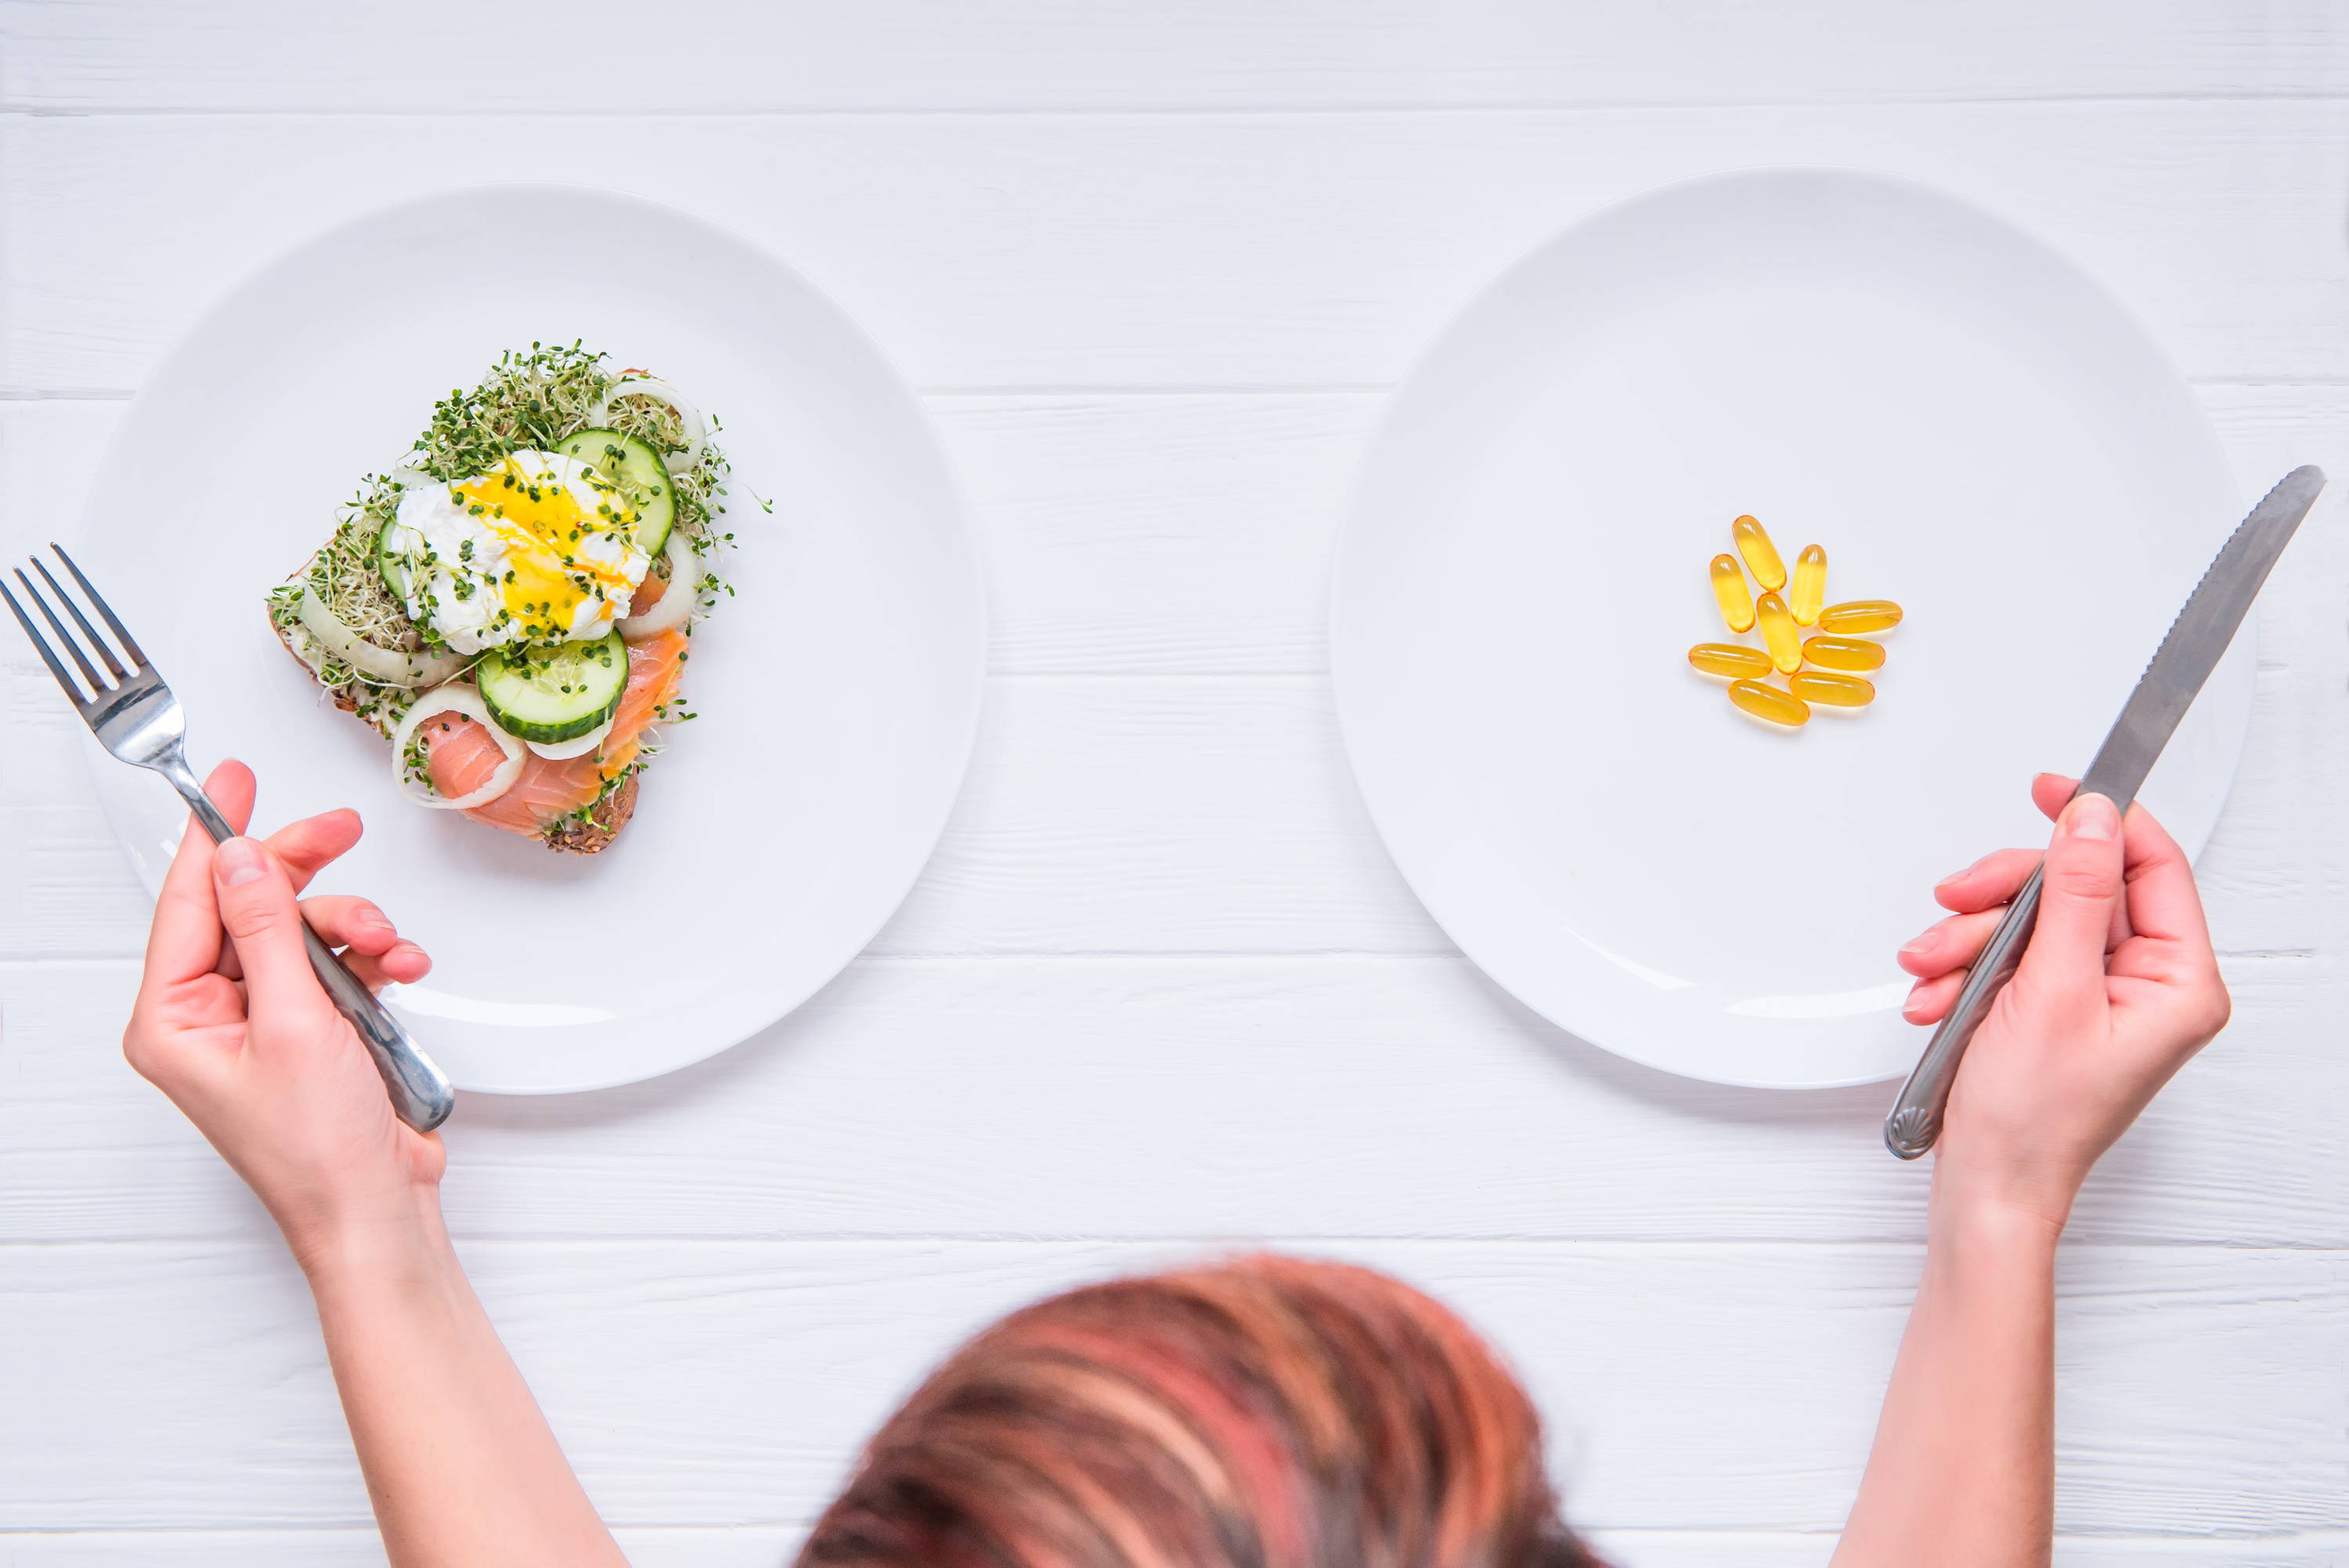 Woman looking at a plate of normal food and a plate full of additives comparing which is better to get nutrients from  